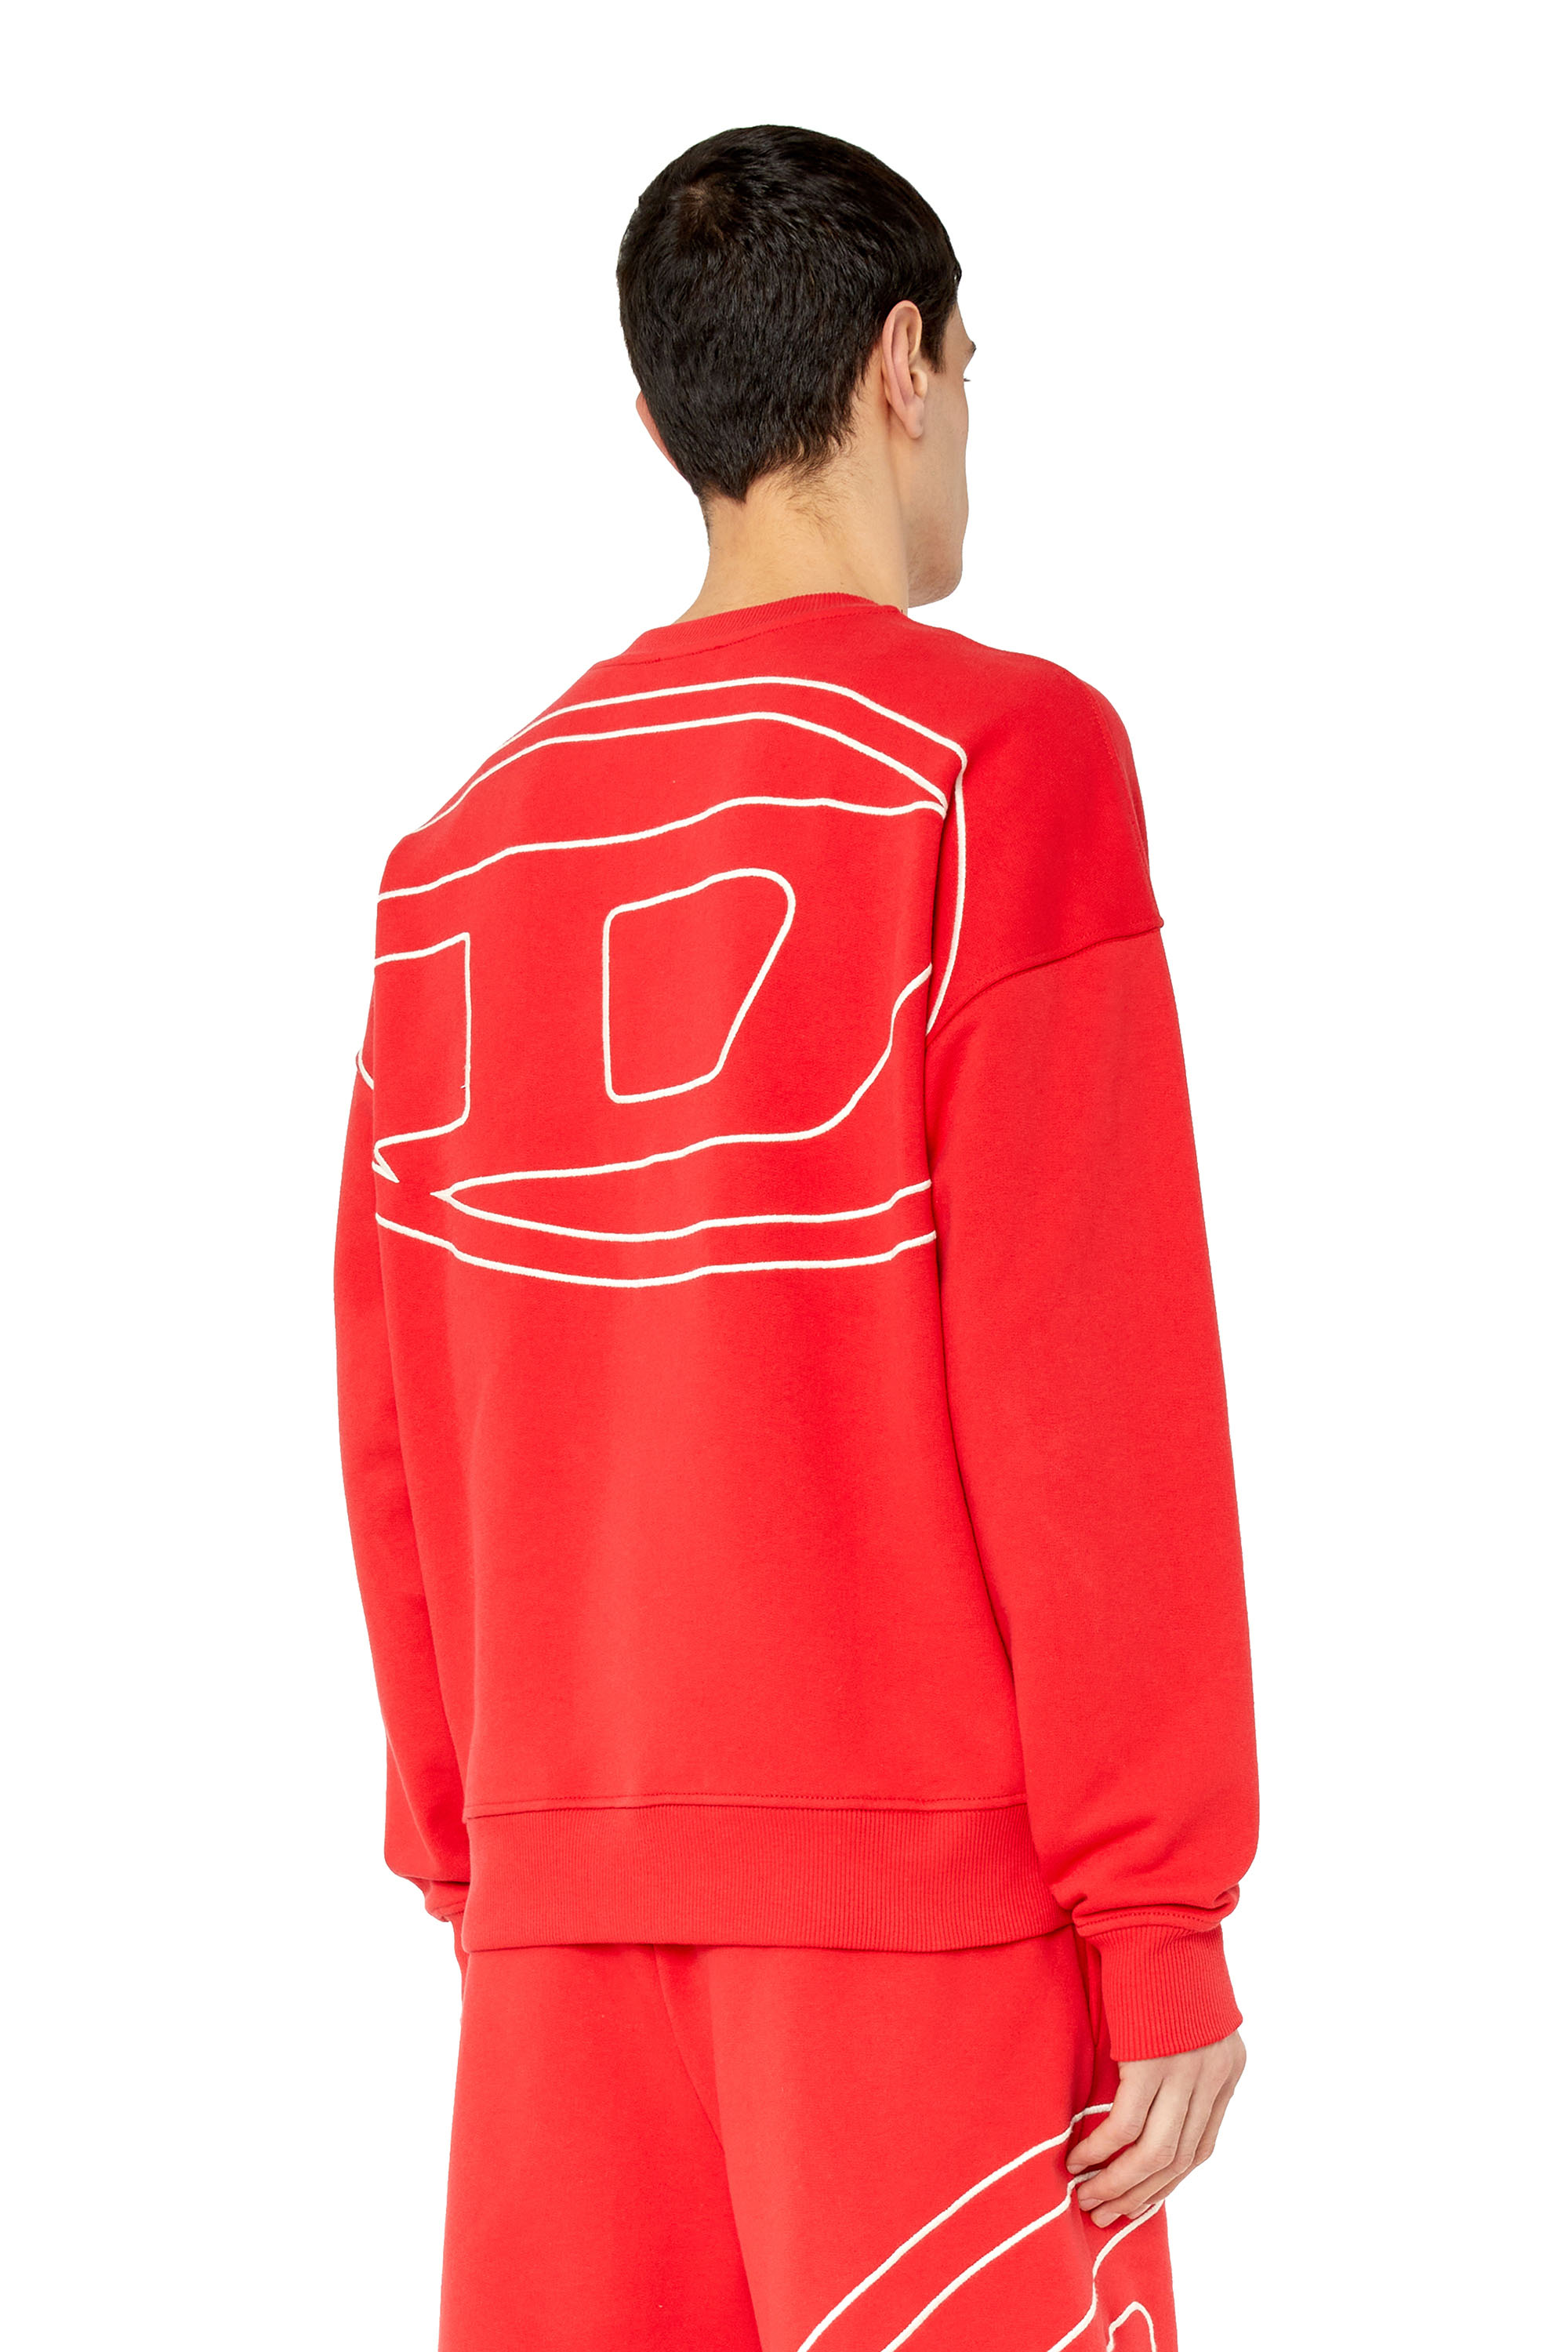 Diesel Sweatshirt With Back Maxi D Logo In Red